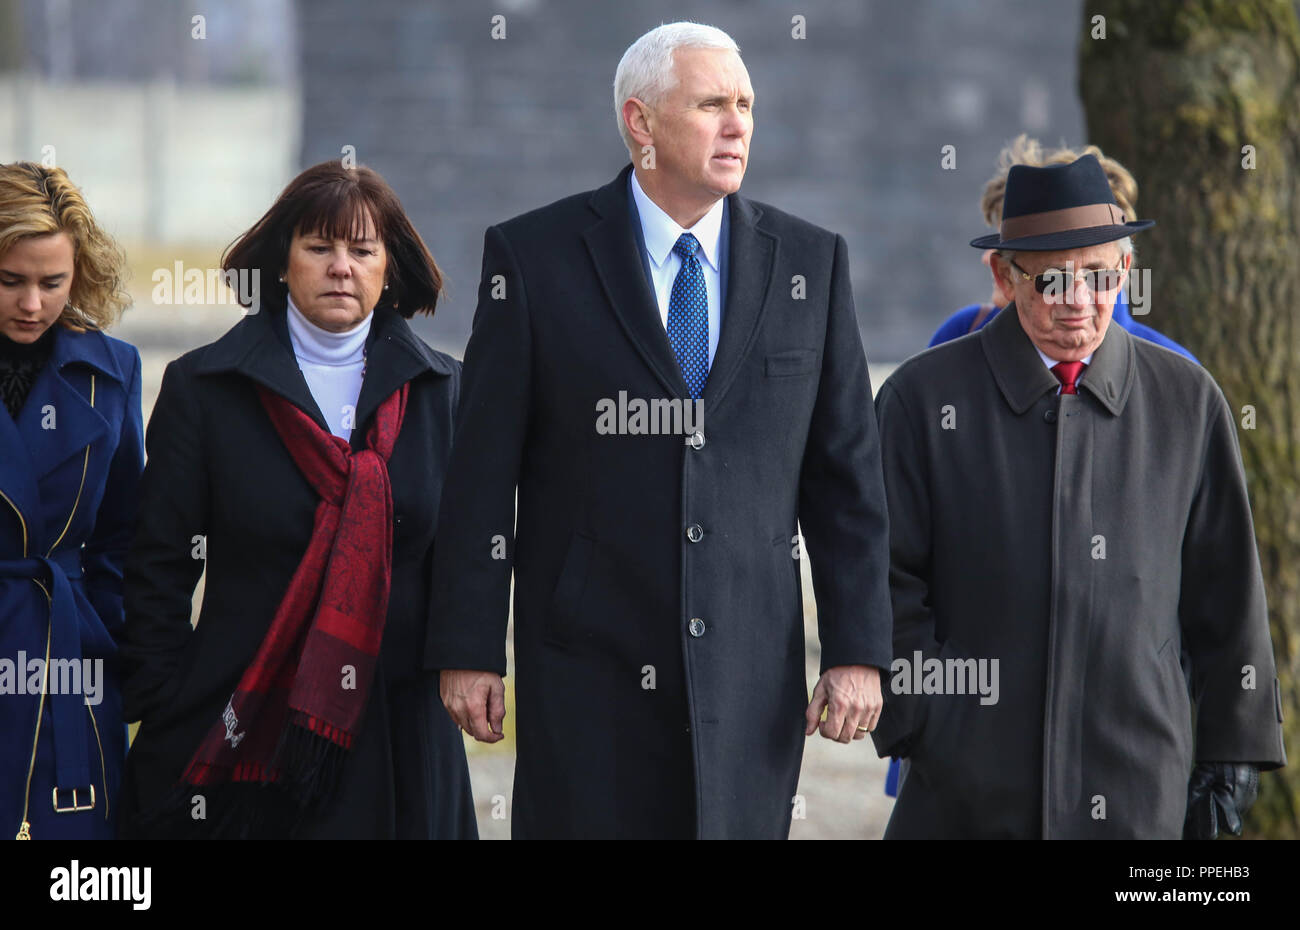 The American Vice President Mike Pence (2nd from right) with his wife Karen and daughter Charlotte on a visit to the Dachau Concentration Camp Memorial Site. At right, contemporary witness Abba Naor. Stock Photo